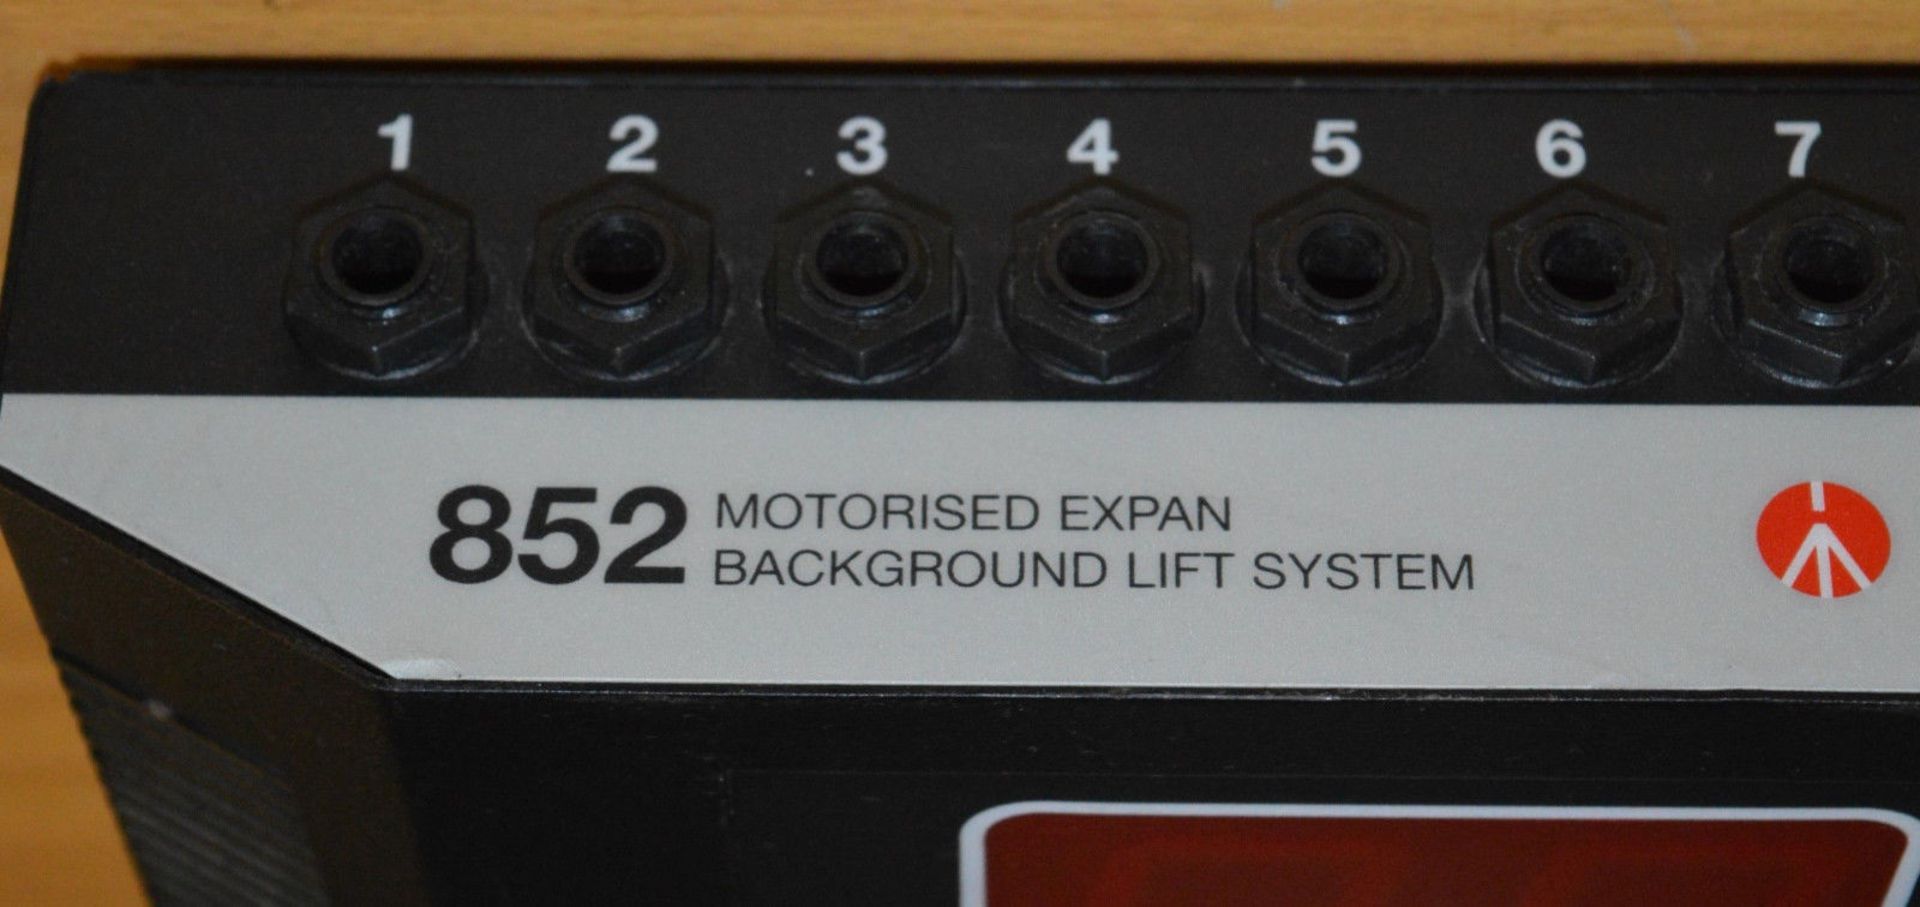 1 x Manfrotto 852 Motorised Expan Photography Background Lift System - Ideal for use in - Image 6 of 6